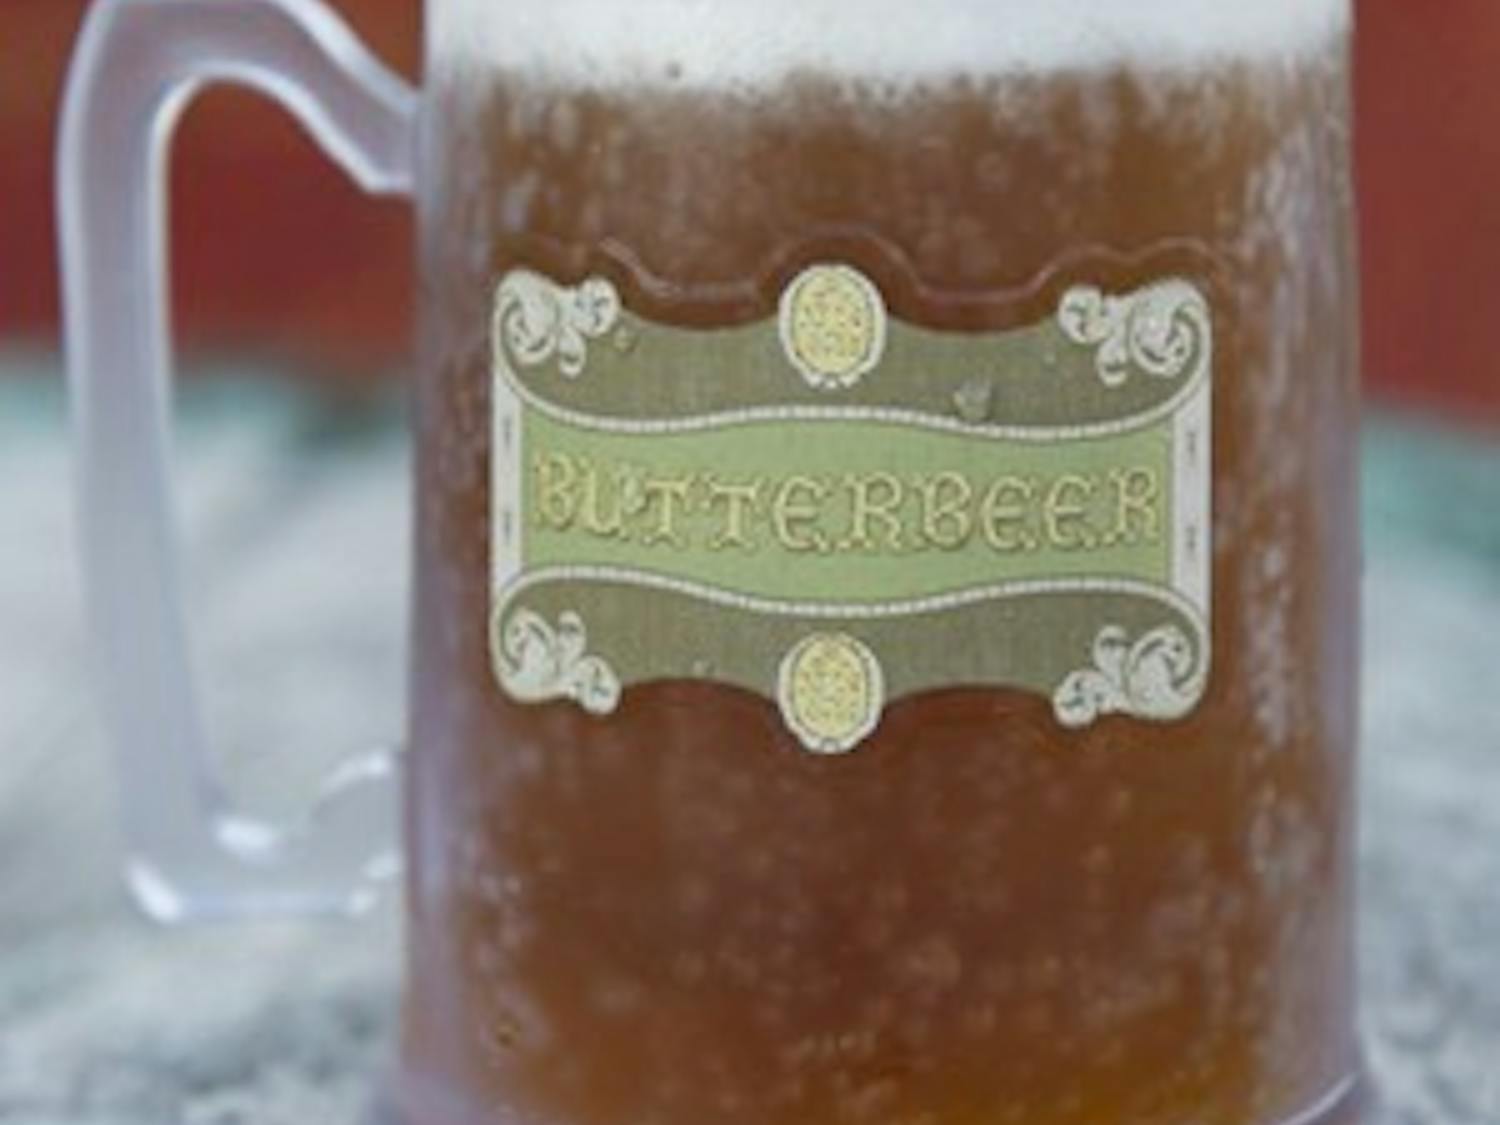 Butterbeer is just one of the mixes you can make on Halloween to spice up your drinking options. 